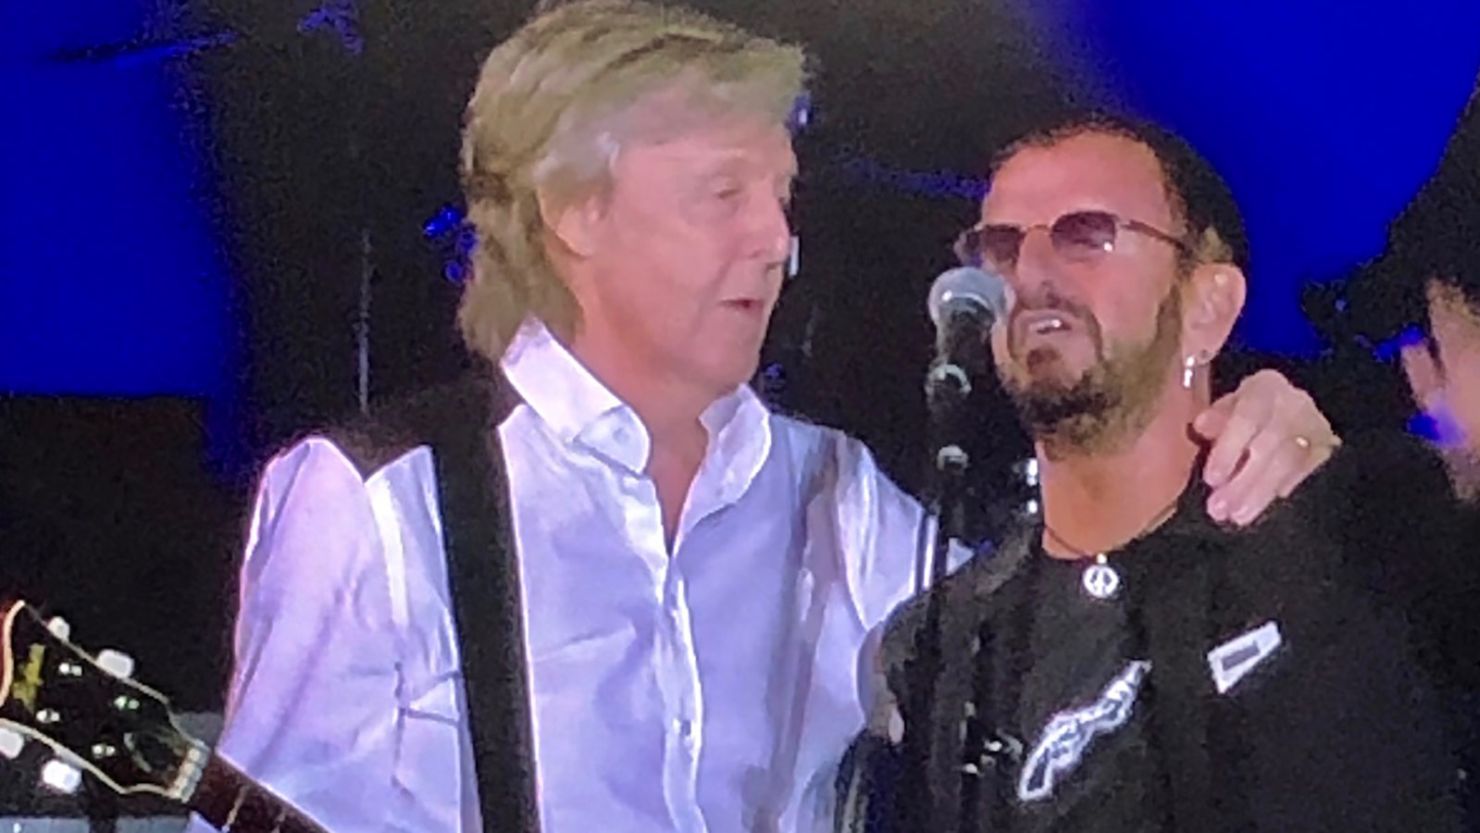 Paul McCartney brought surprise guest Ringo Starr onstage Saturday night in L.A.